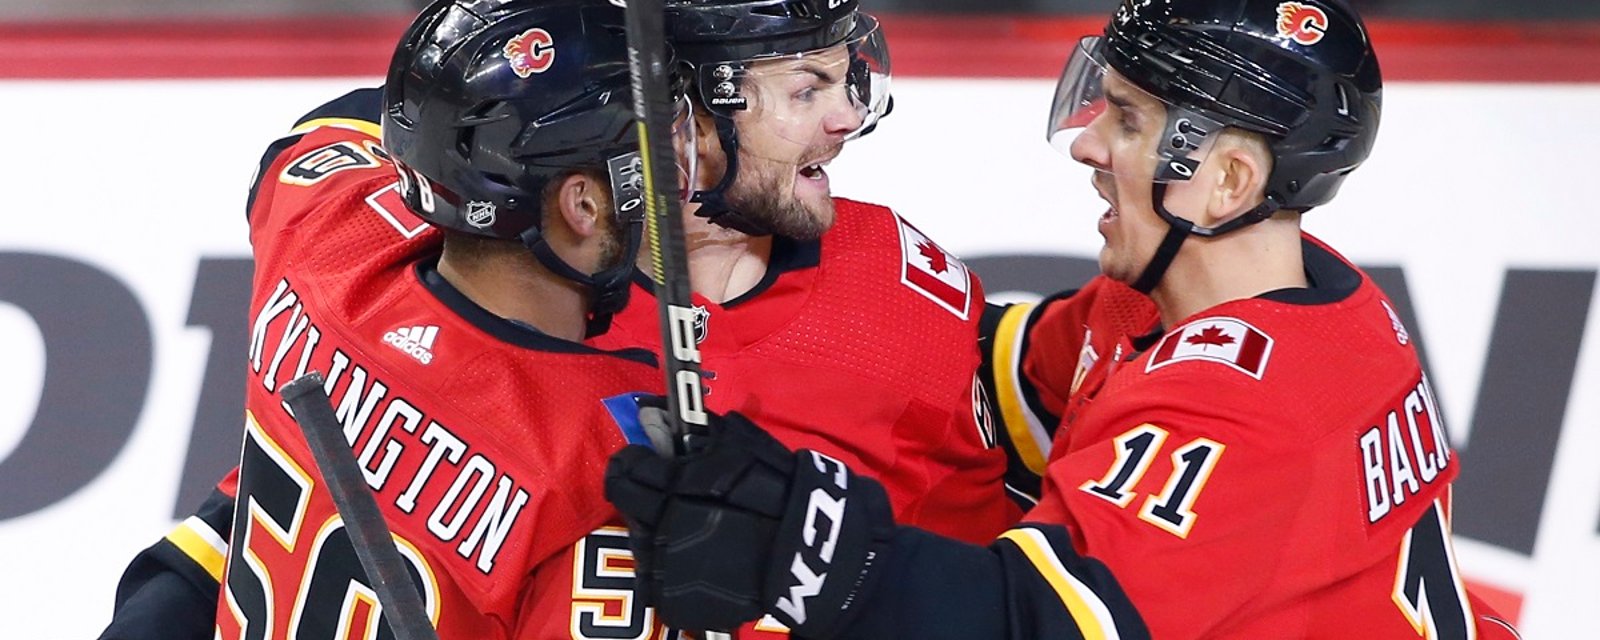 Report: Flames make significant lineup changes to get “bigger” against Dallas.